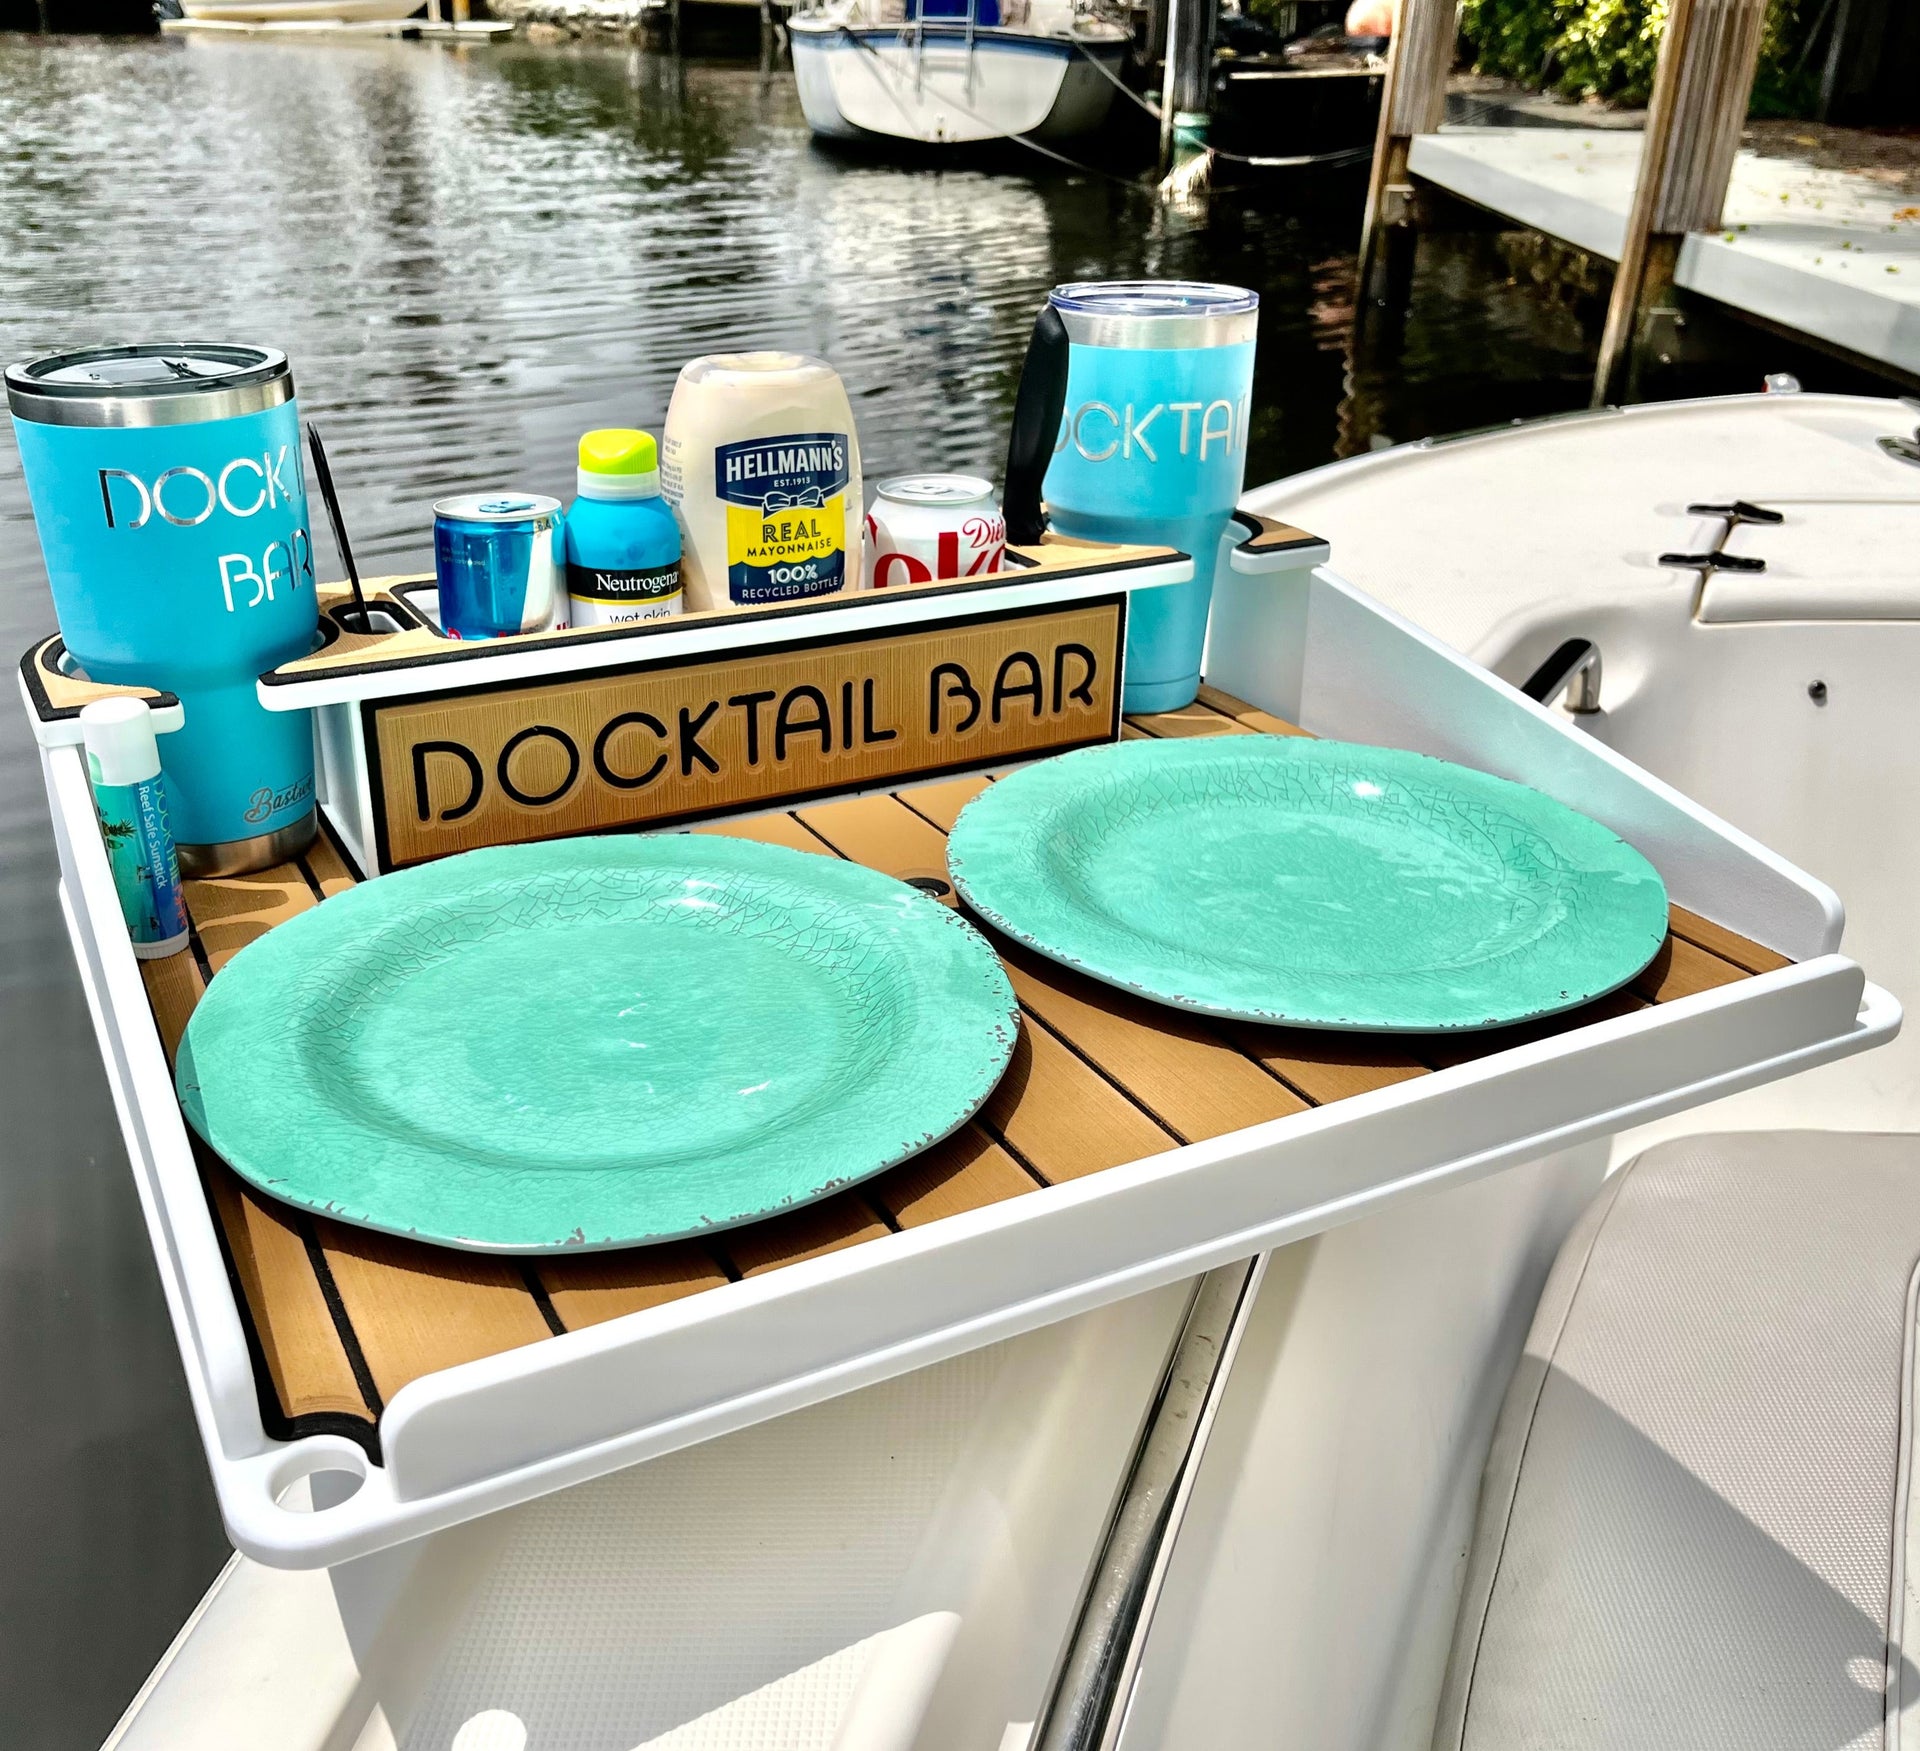 Who can relate? #docktailbar #boat #boatlife #boating #boataccessorie